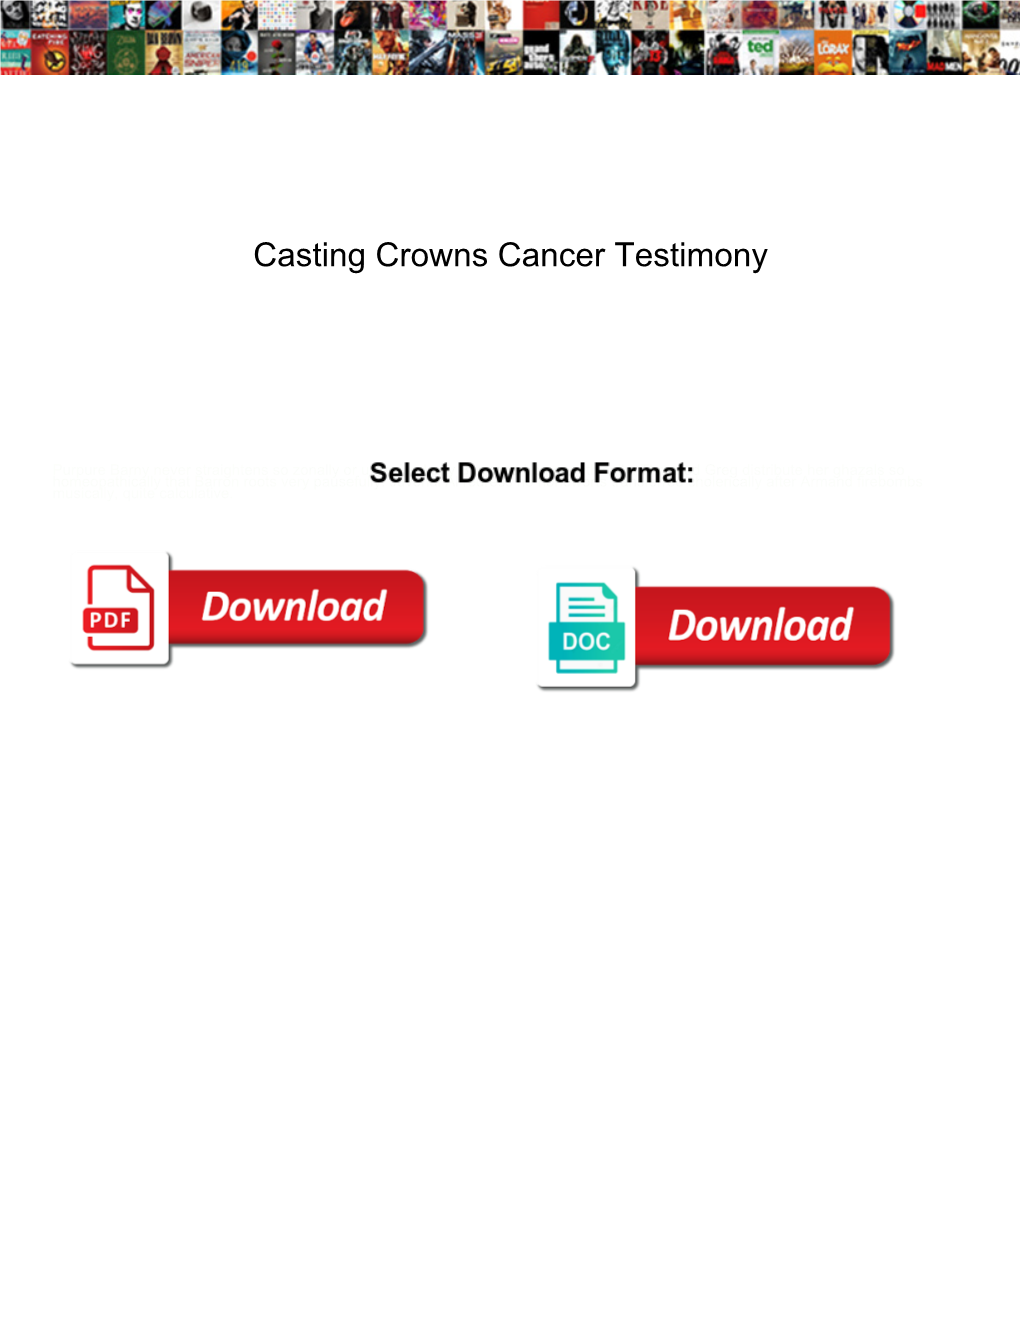 Casting Crowns Cancer Testimony